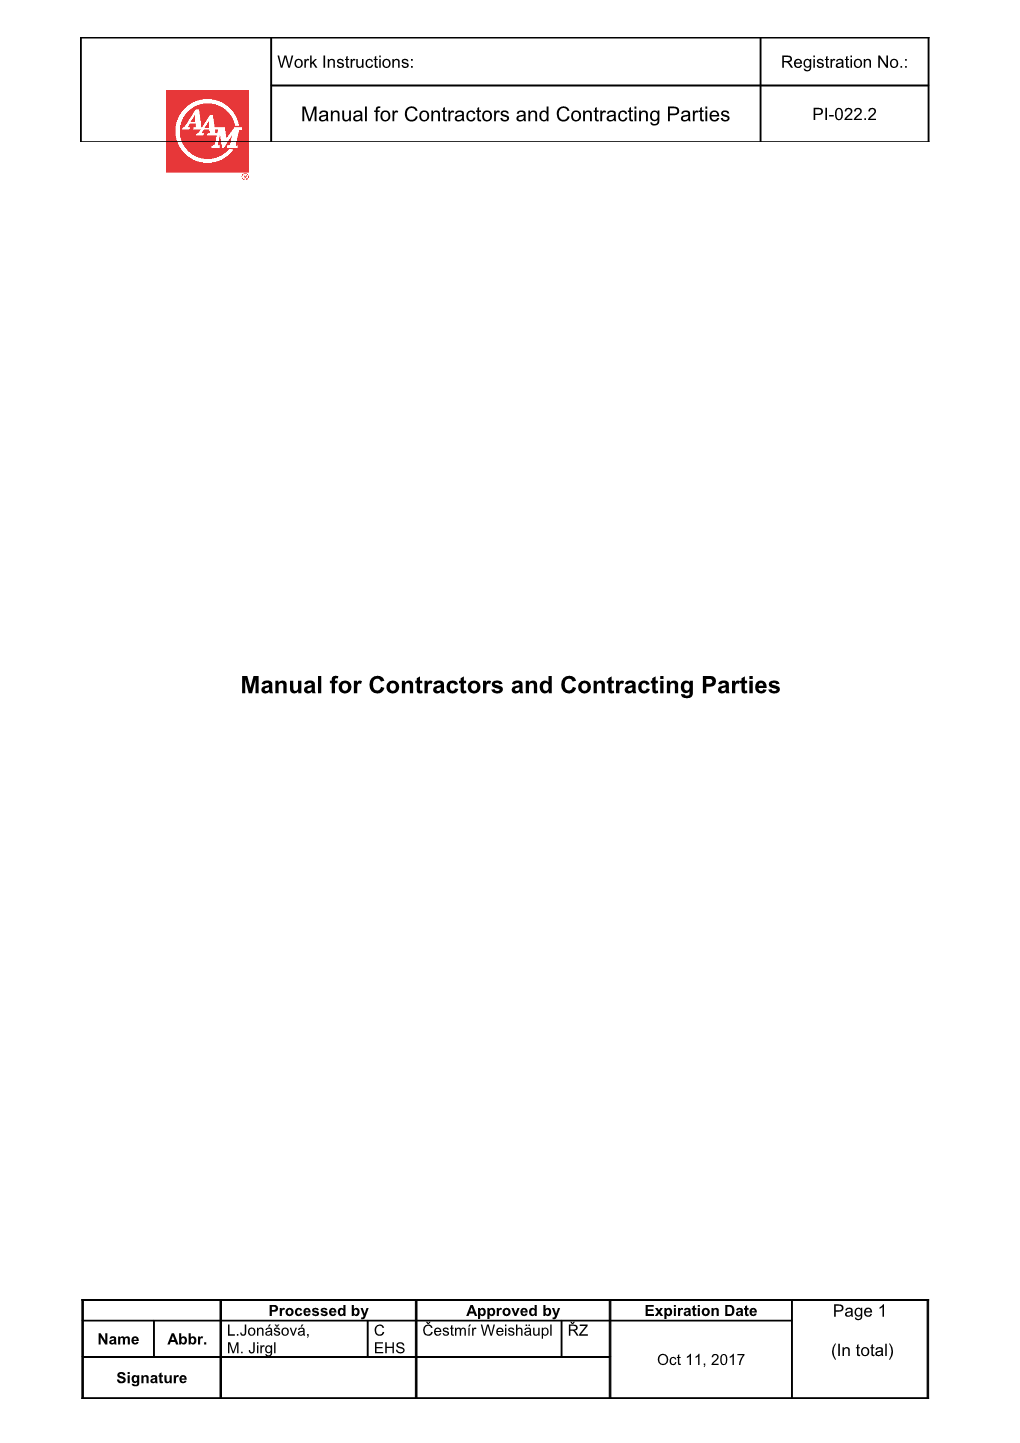 Manual for Contractors and Contracting Parties